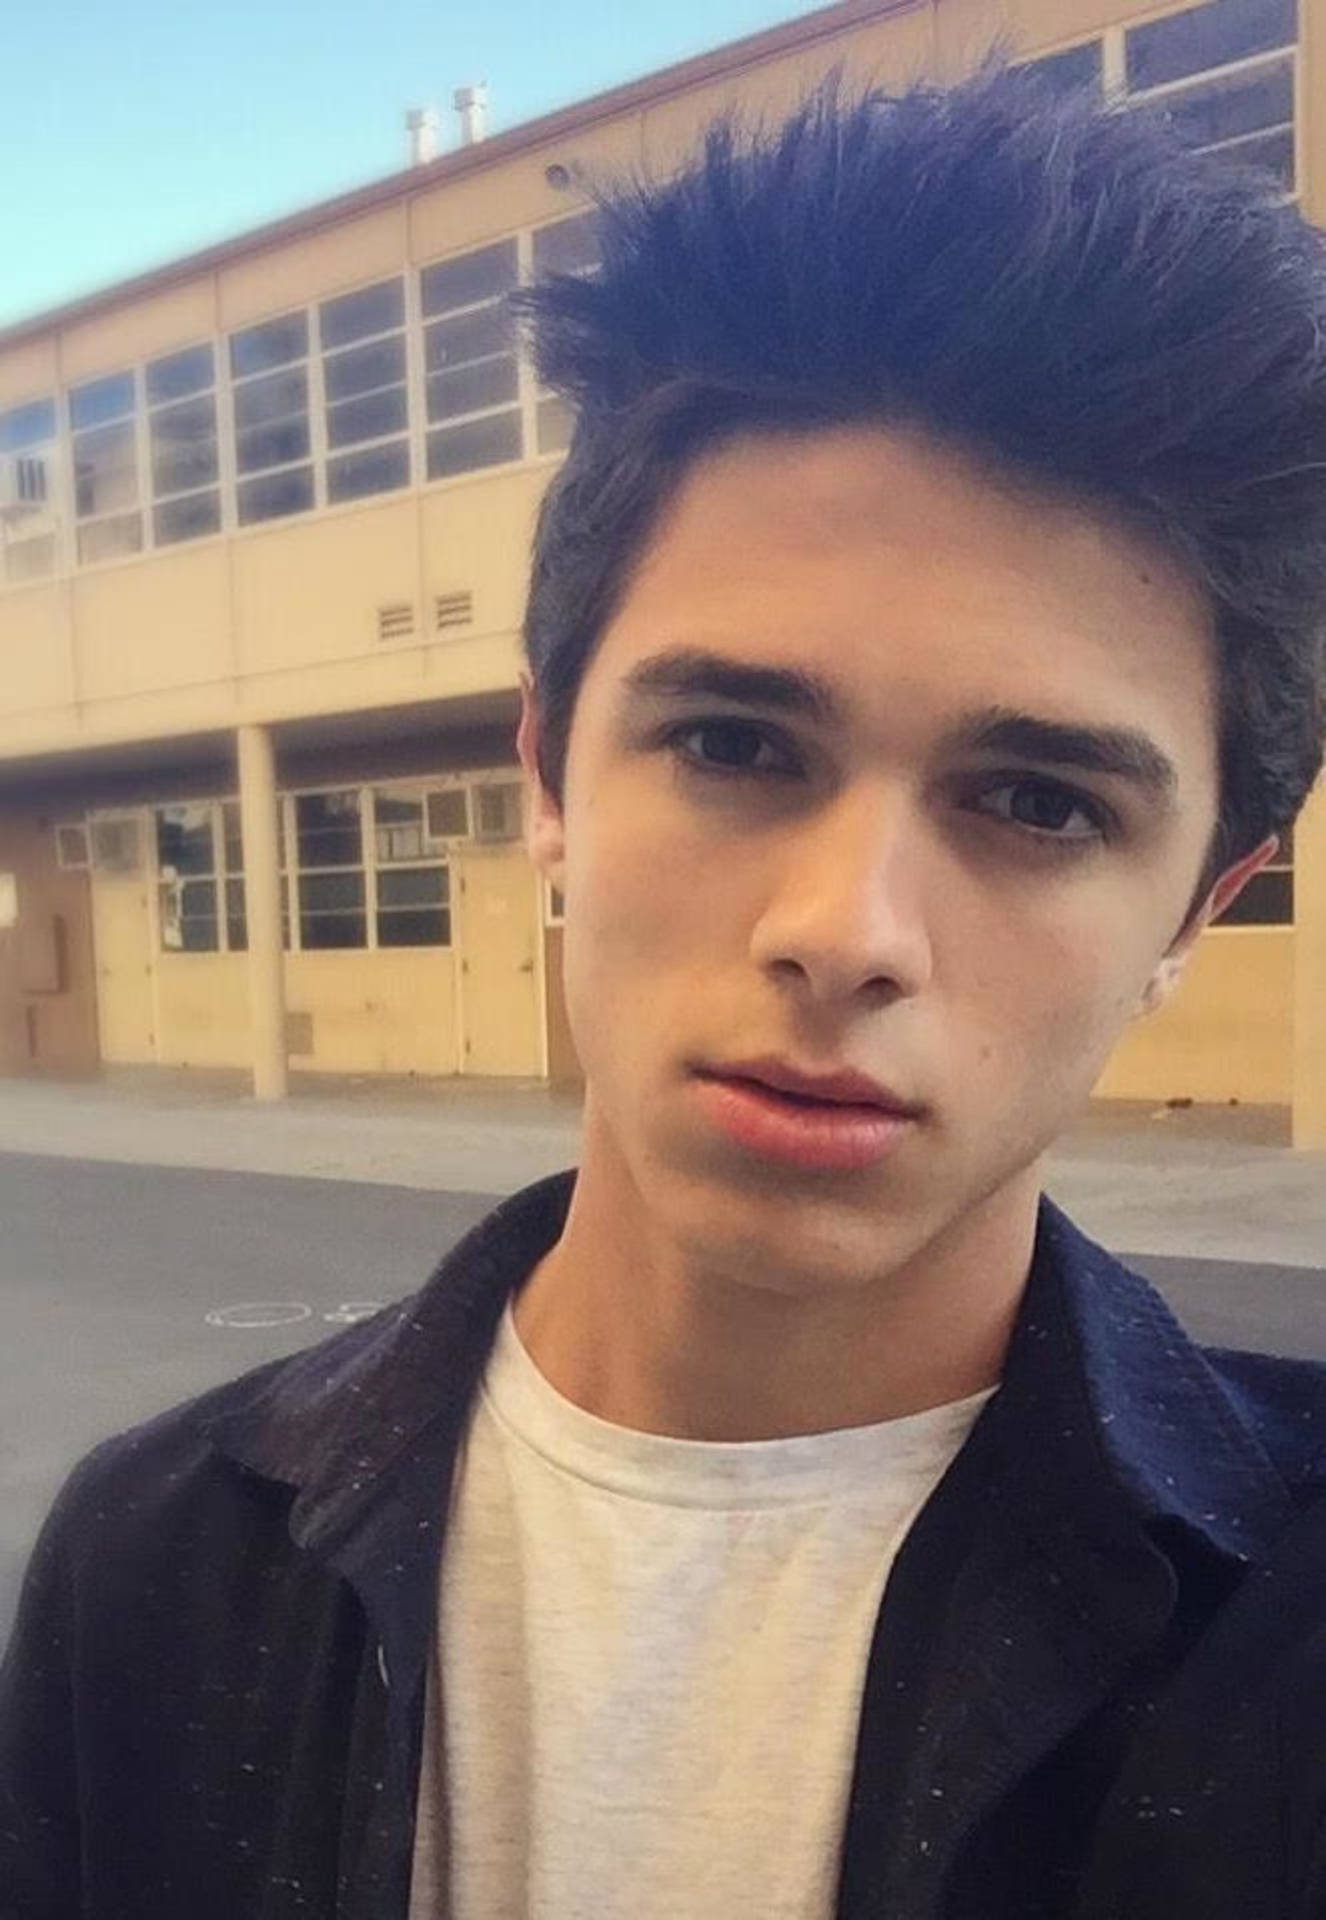 Vibrant Photo Of Brent Rivera Leaning Against A Building.